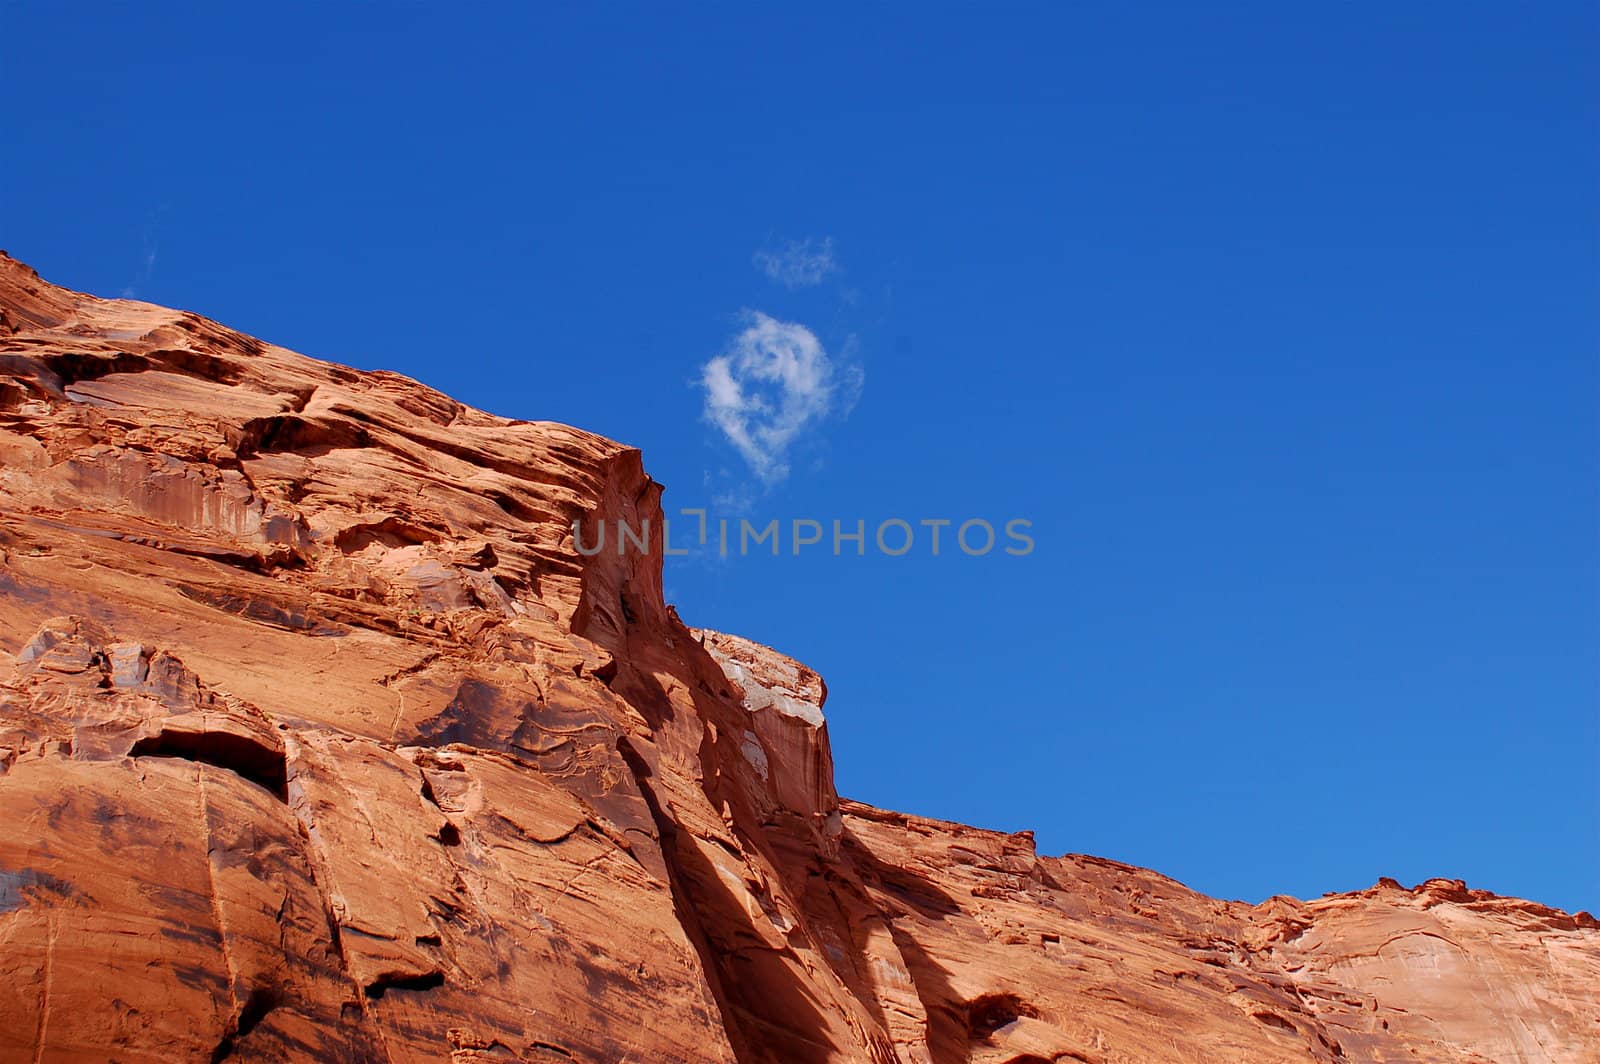 Top of a ledge of the Grand Canyon against a deep blue sky with a whisper of a cloud central to the shot.